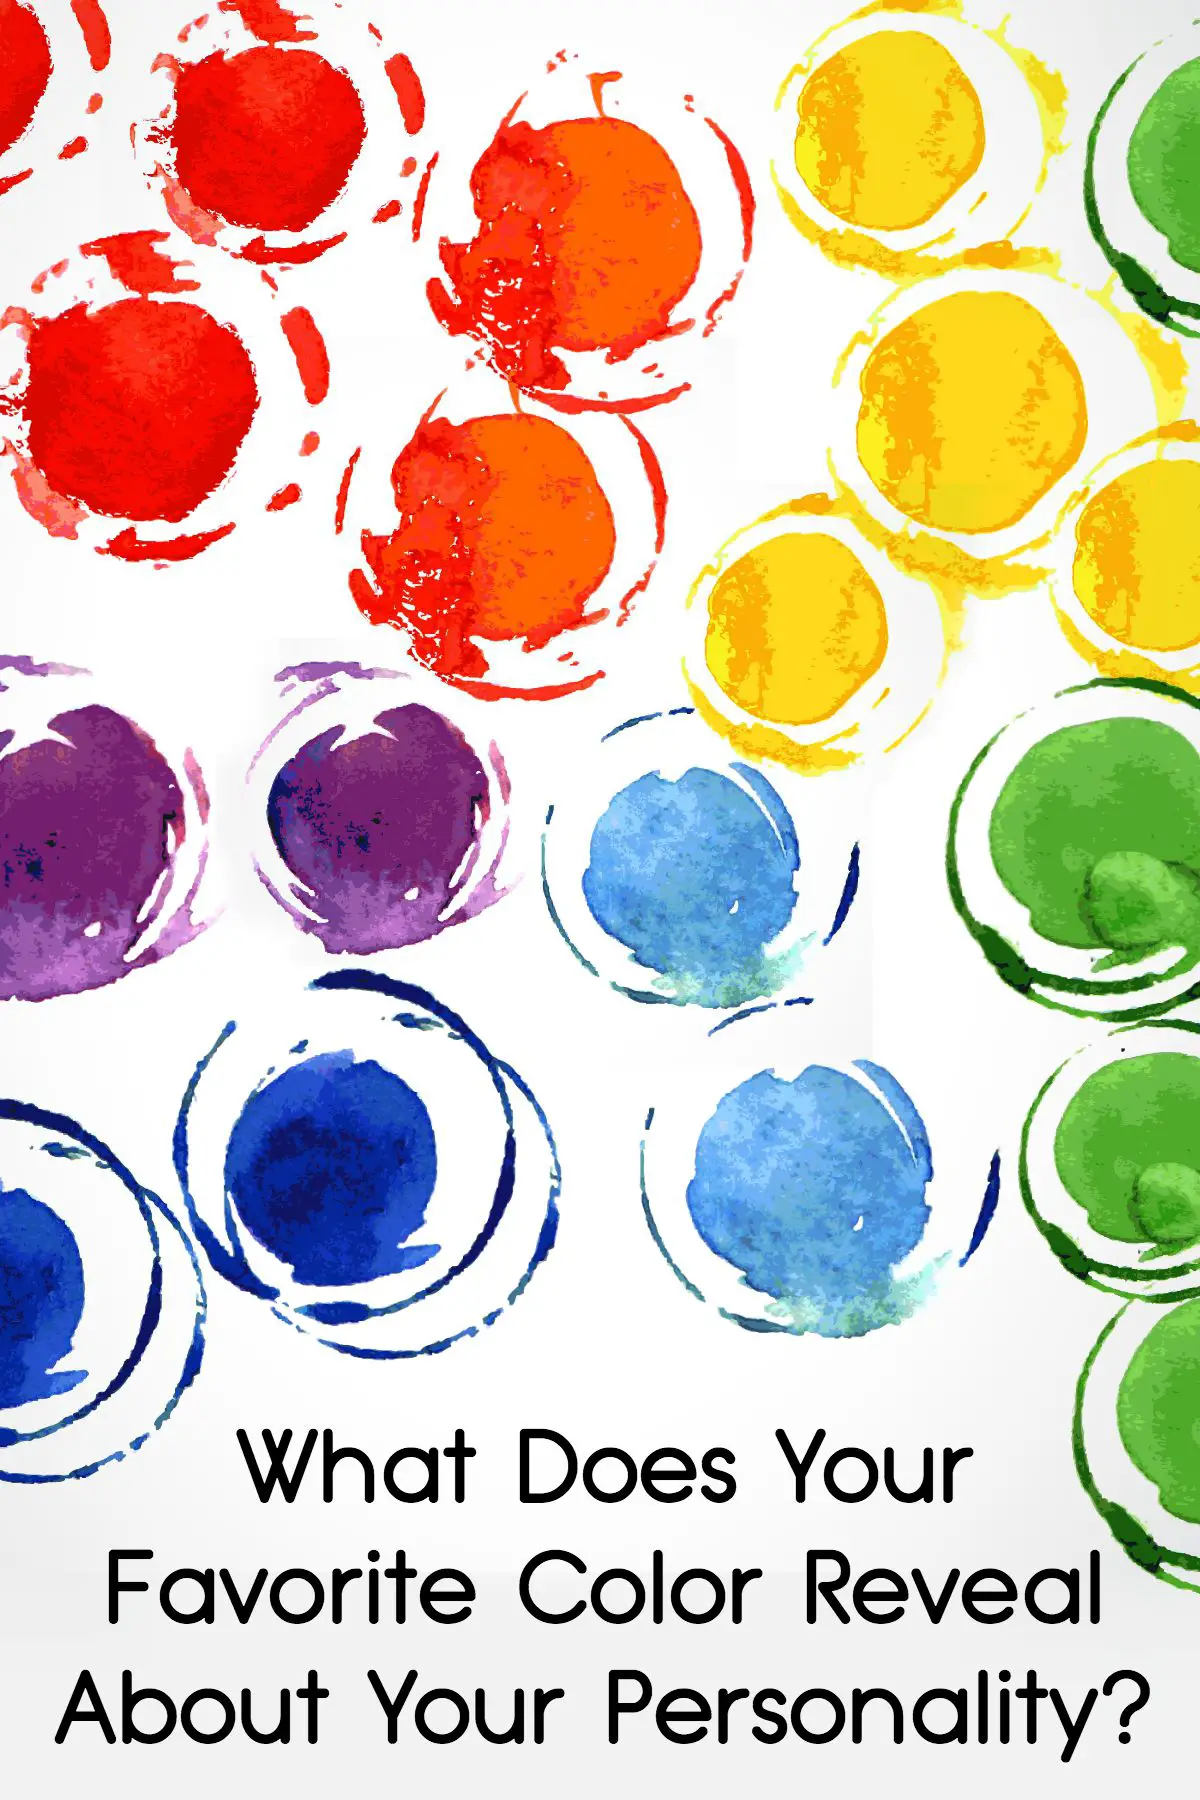 What Does Your Favorite Color Reveal About Your Personality Coloring Wallpapers Download Free Images Wallpaper [coloring365.blogspot.com]